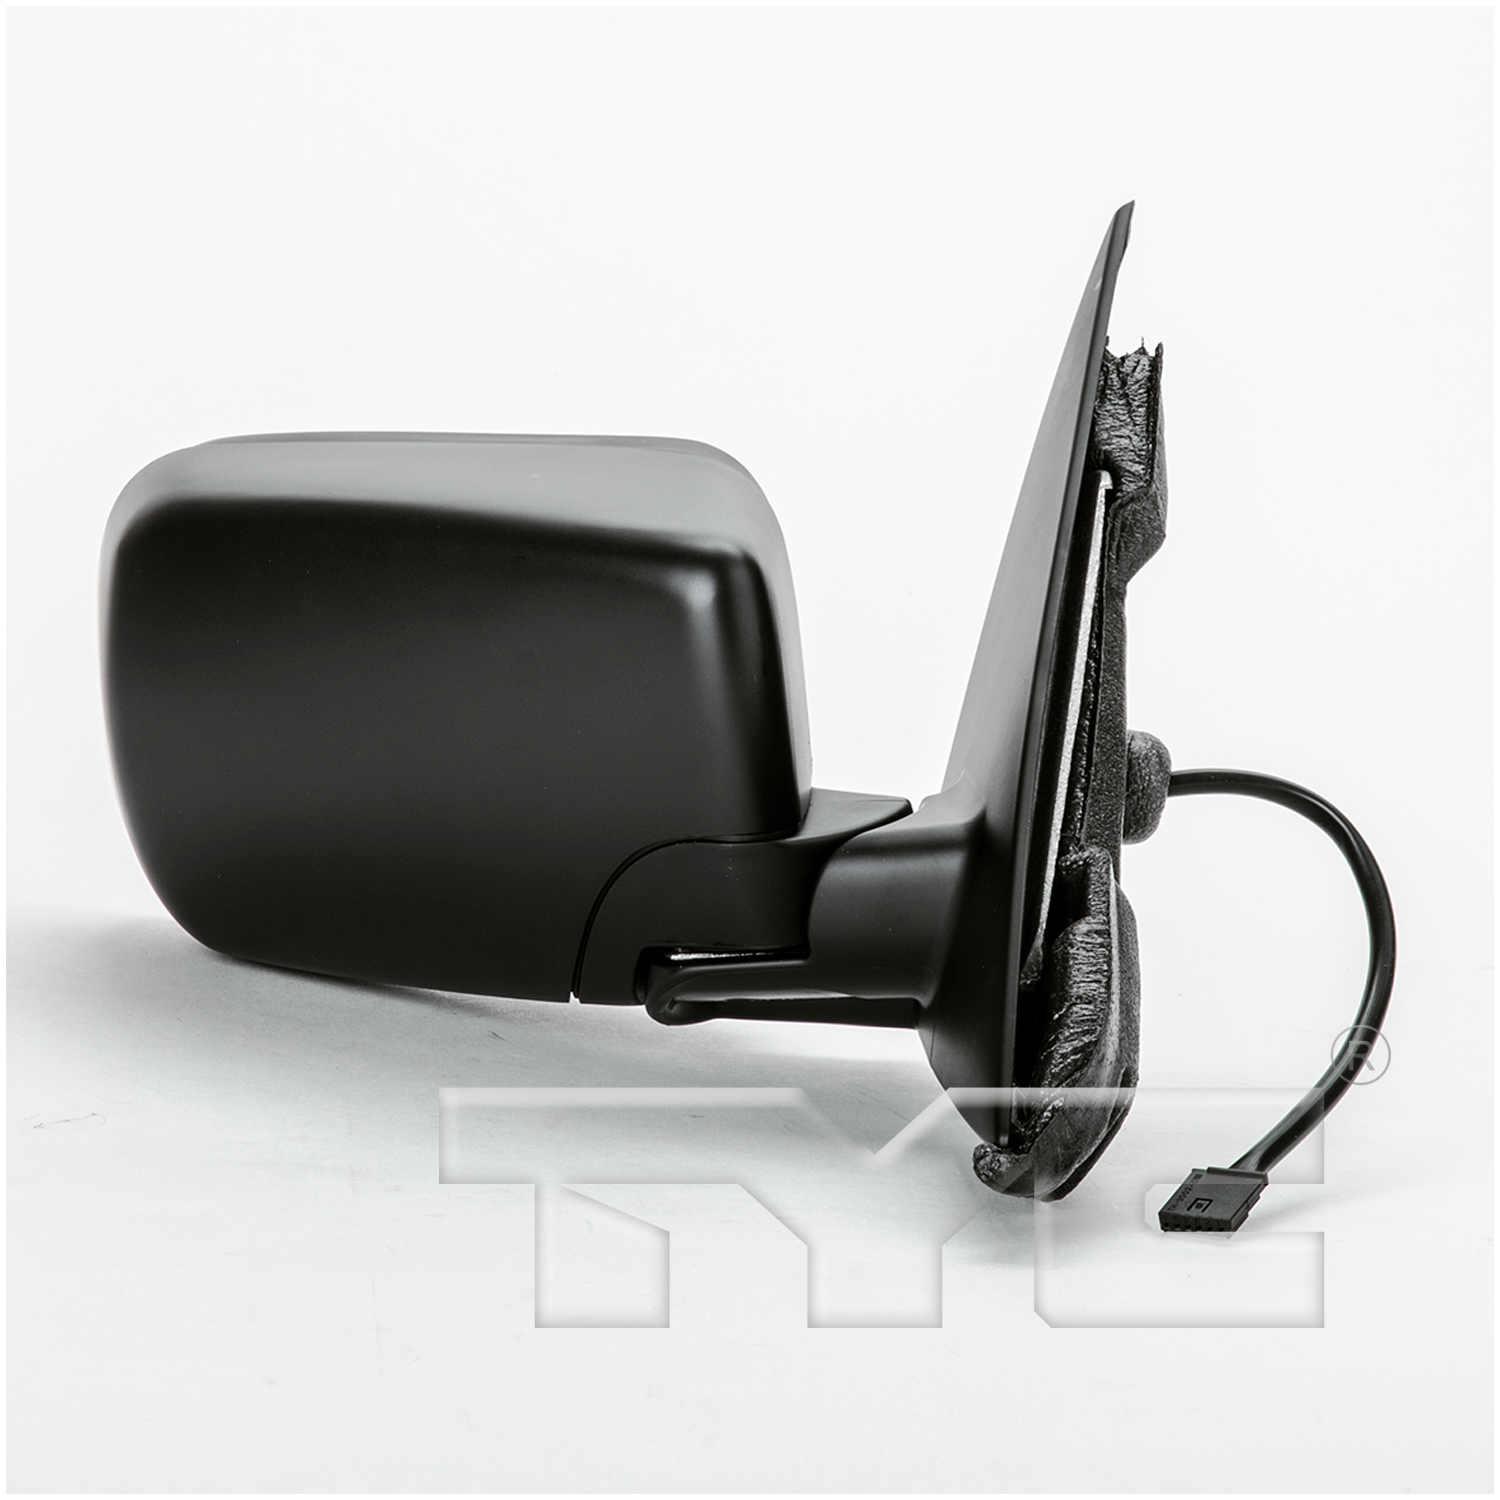 Aftermarket MIRRORS for BMW - 325I, 325i,01-04,RT Mirror outside rear view